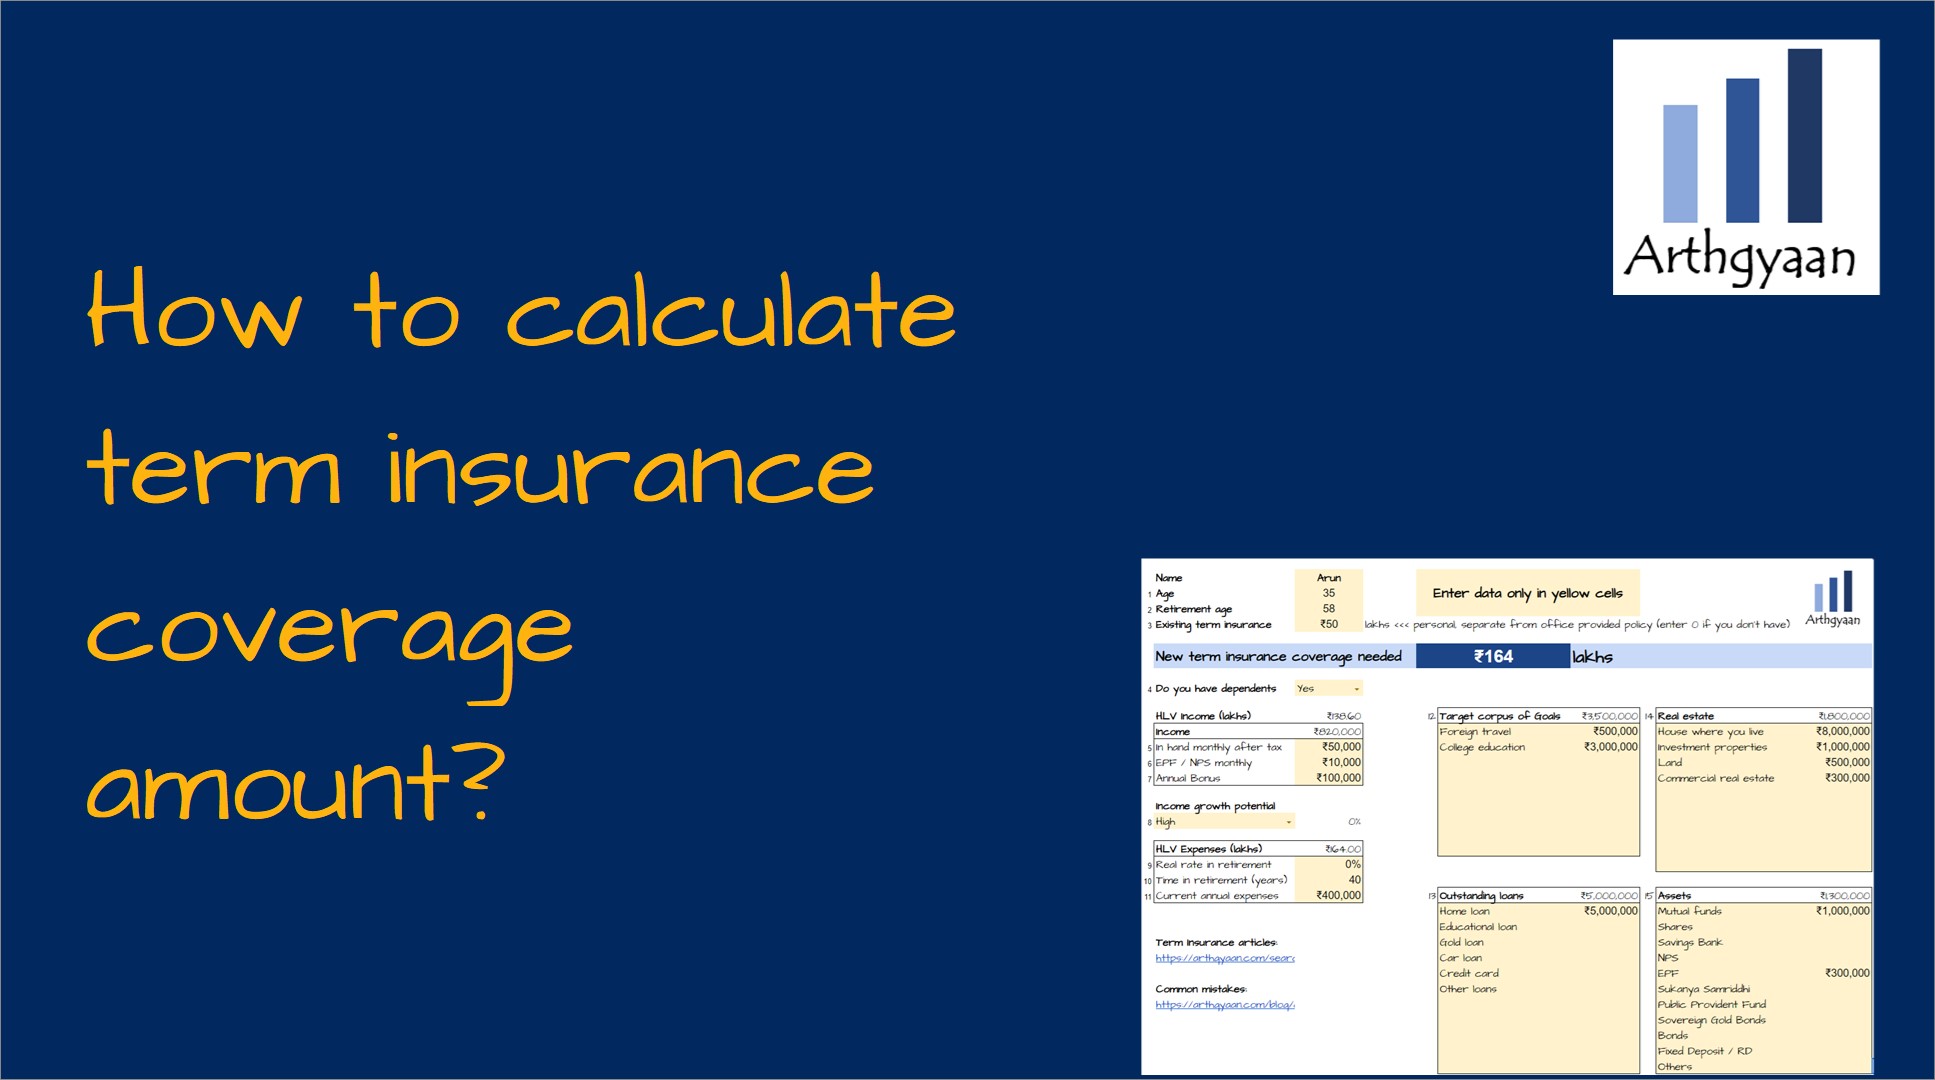 How to calculate term insurance coverage amount?